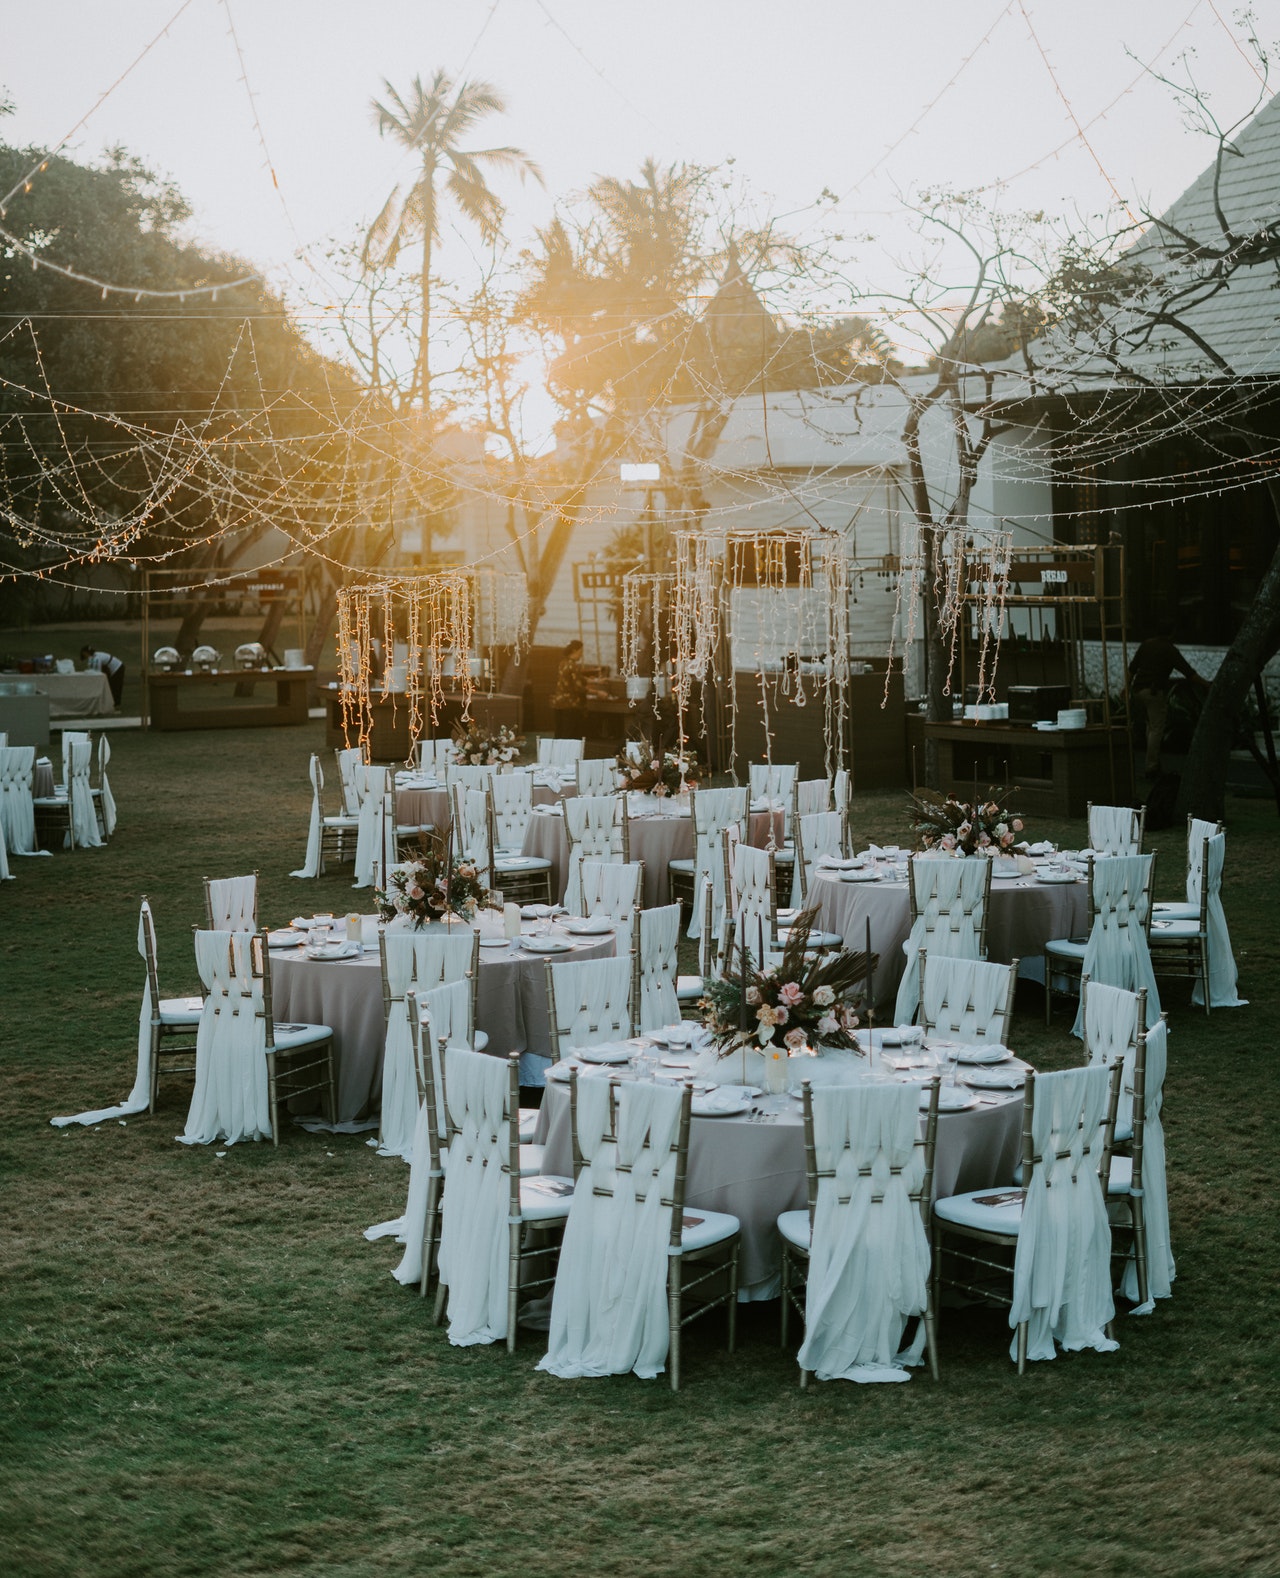 Top ideas for an outdoor event or wedding